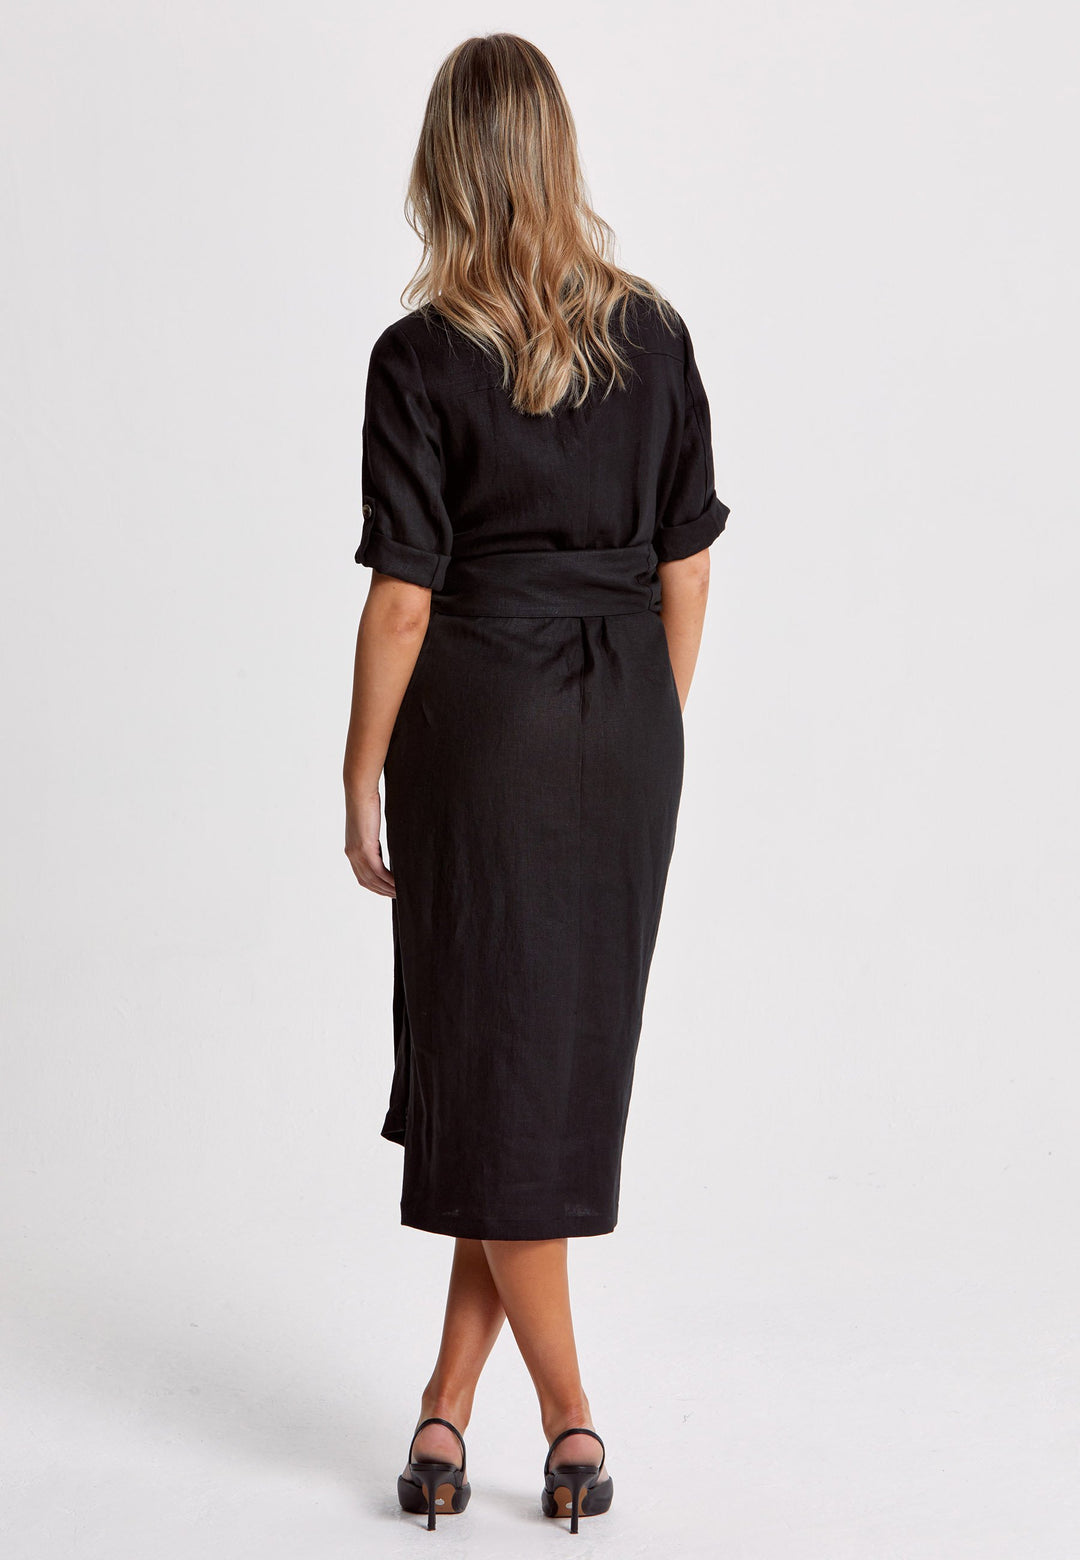 Leonne, the investment-worthy black linen wrap dress. Crafted in a sustainable Irish linen. An authentic wrap dress that ties to the side with a generous belt and flattering gathers at the waist. Engineered with a turned back elbow length sleeve. The ultimate summer staple.